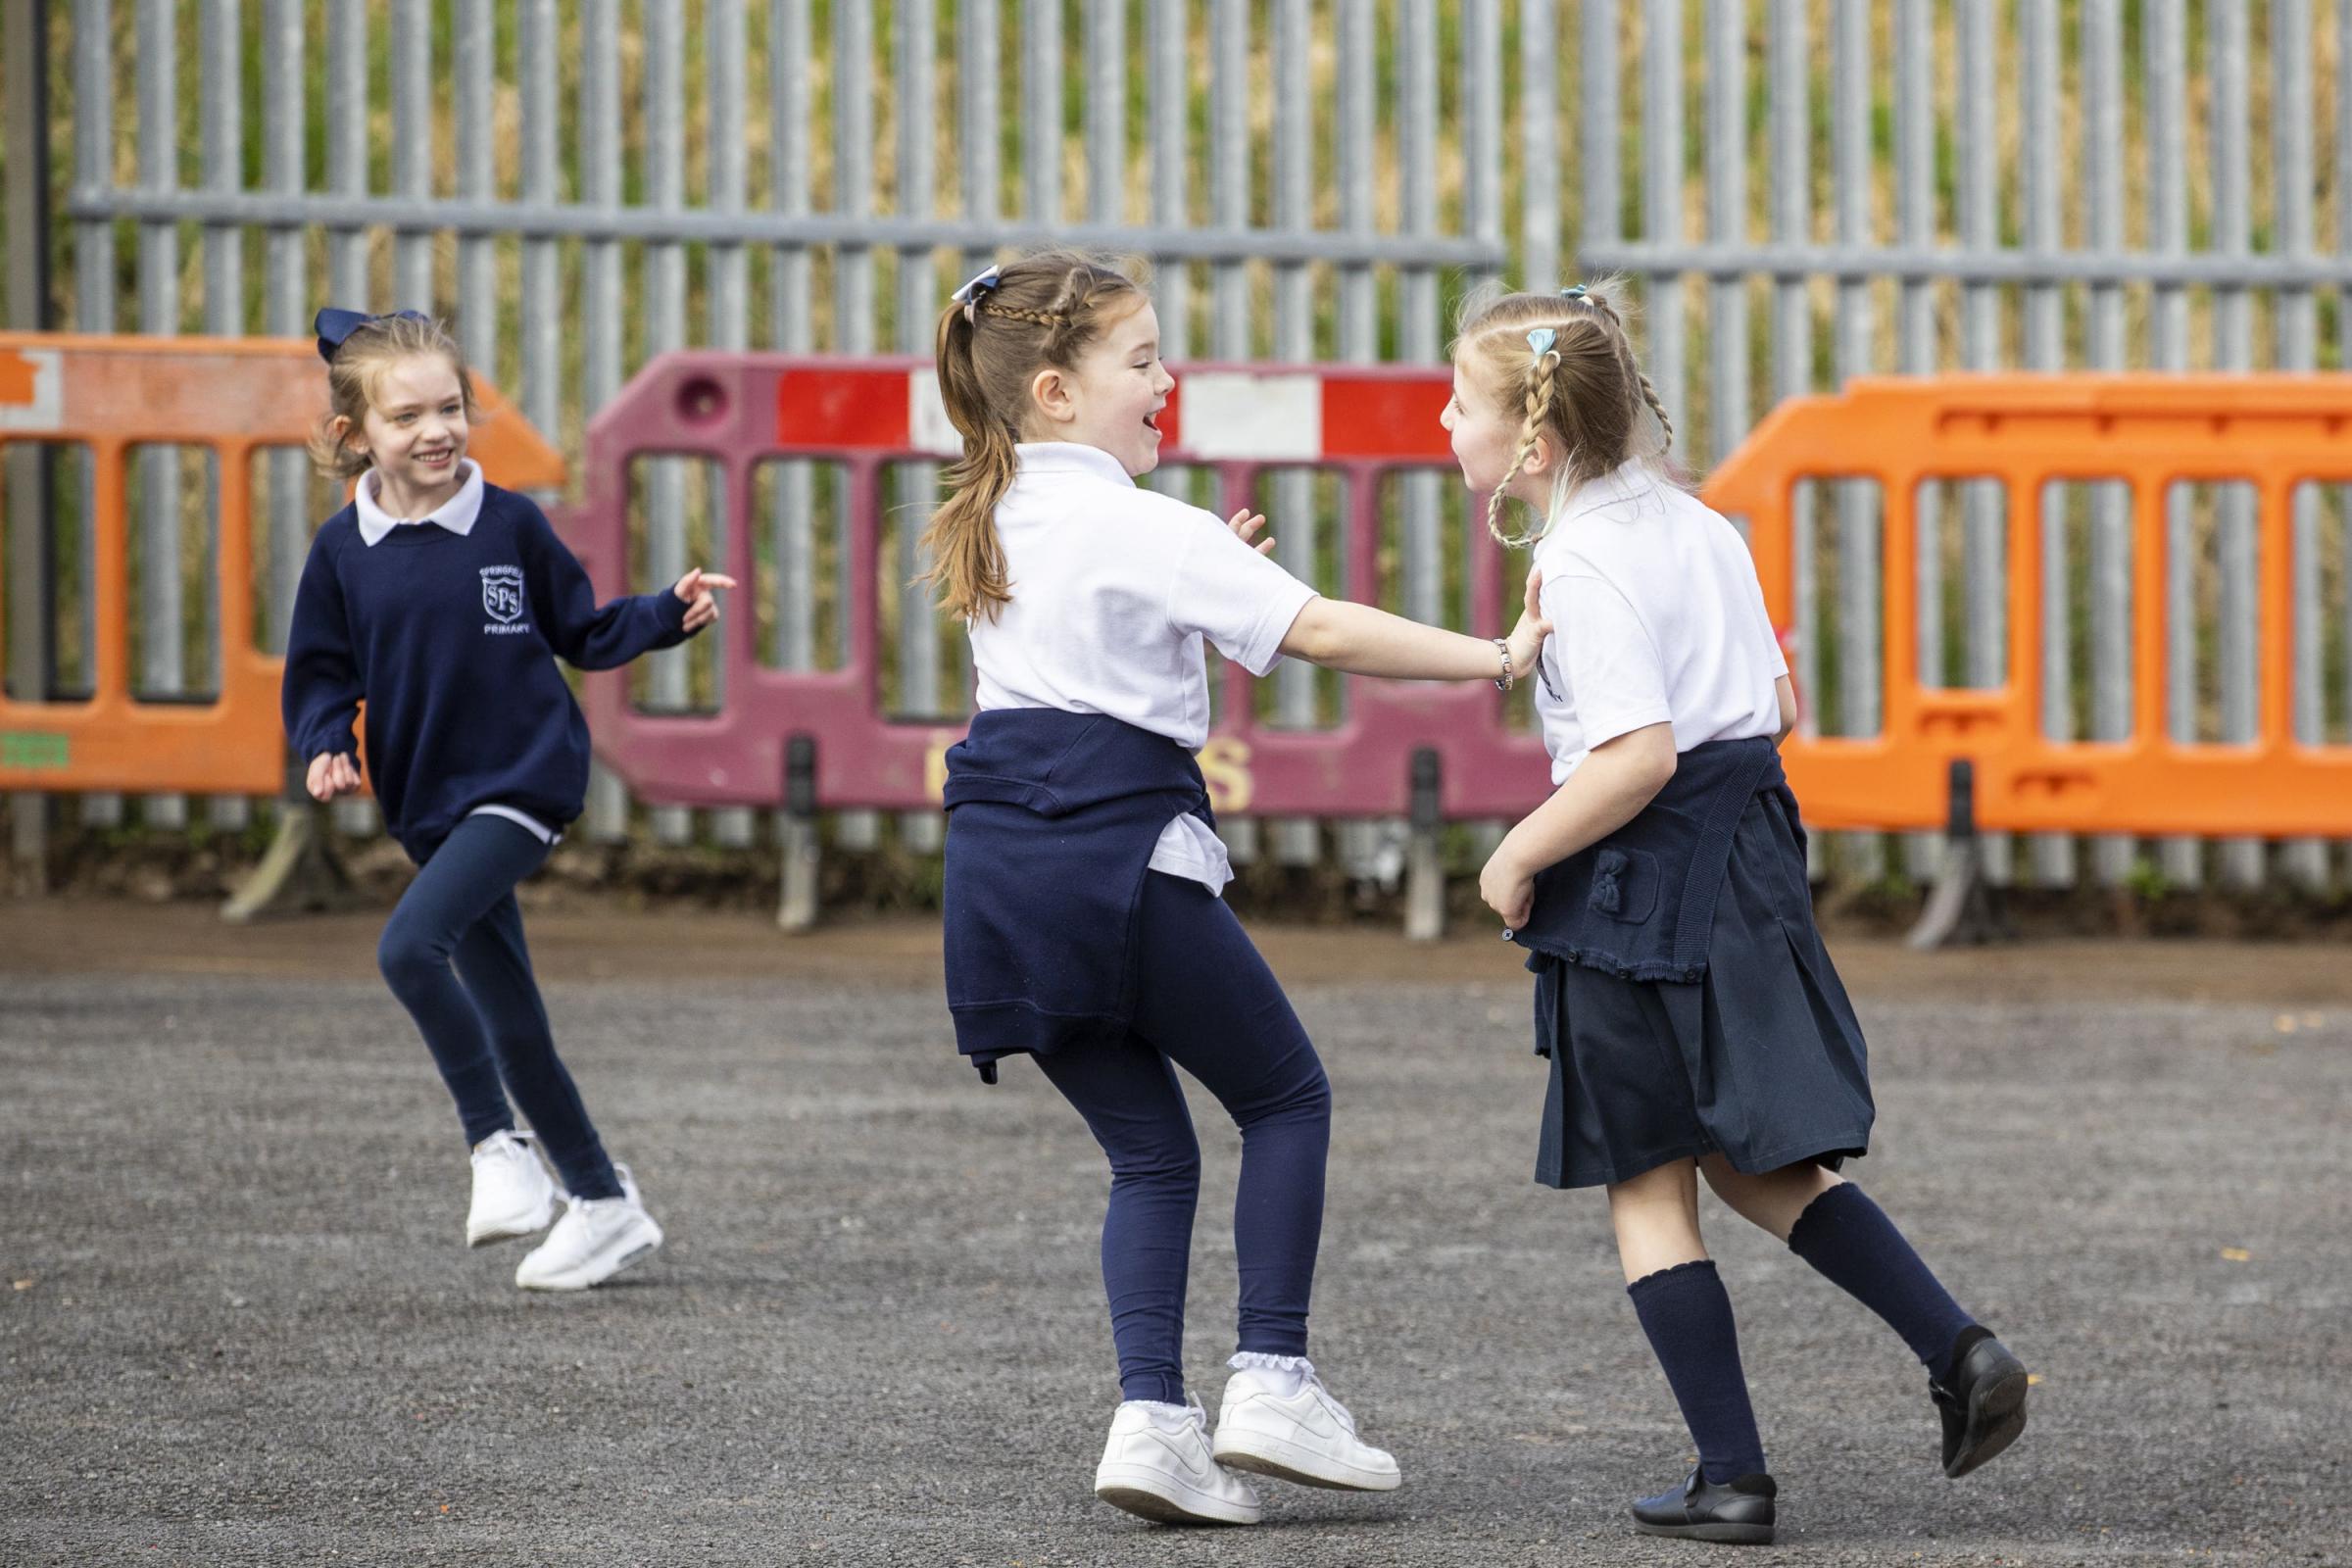 Pupils boost memory and fitness from daily activity, say researchers